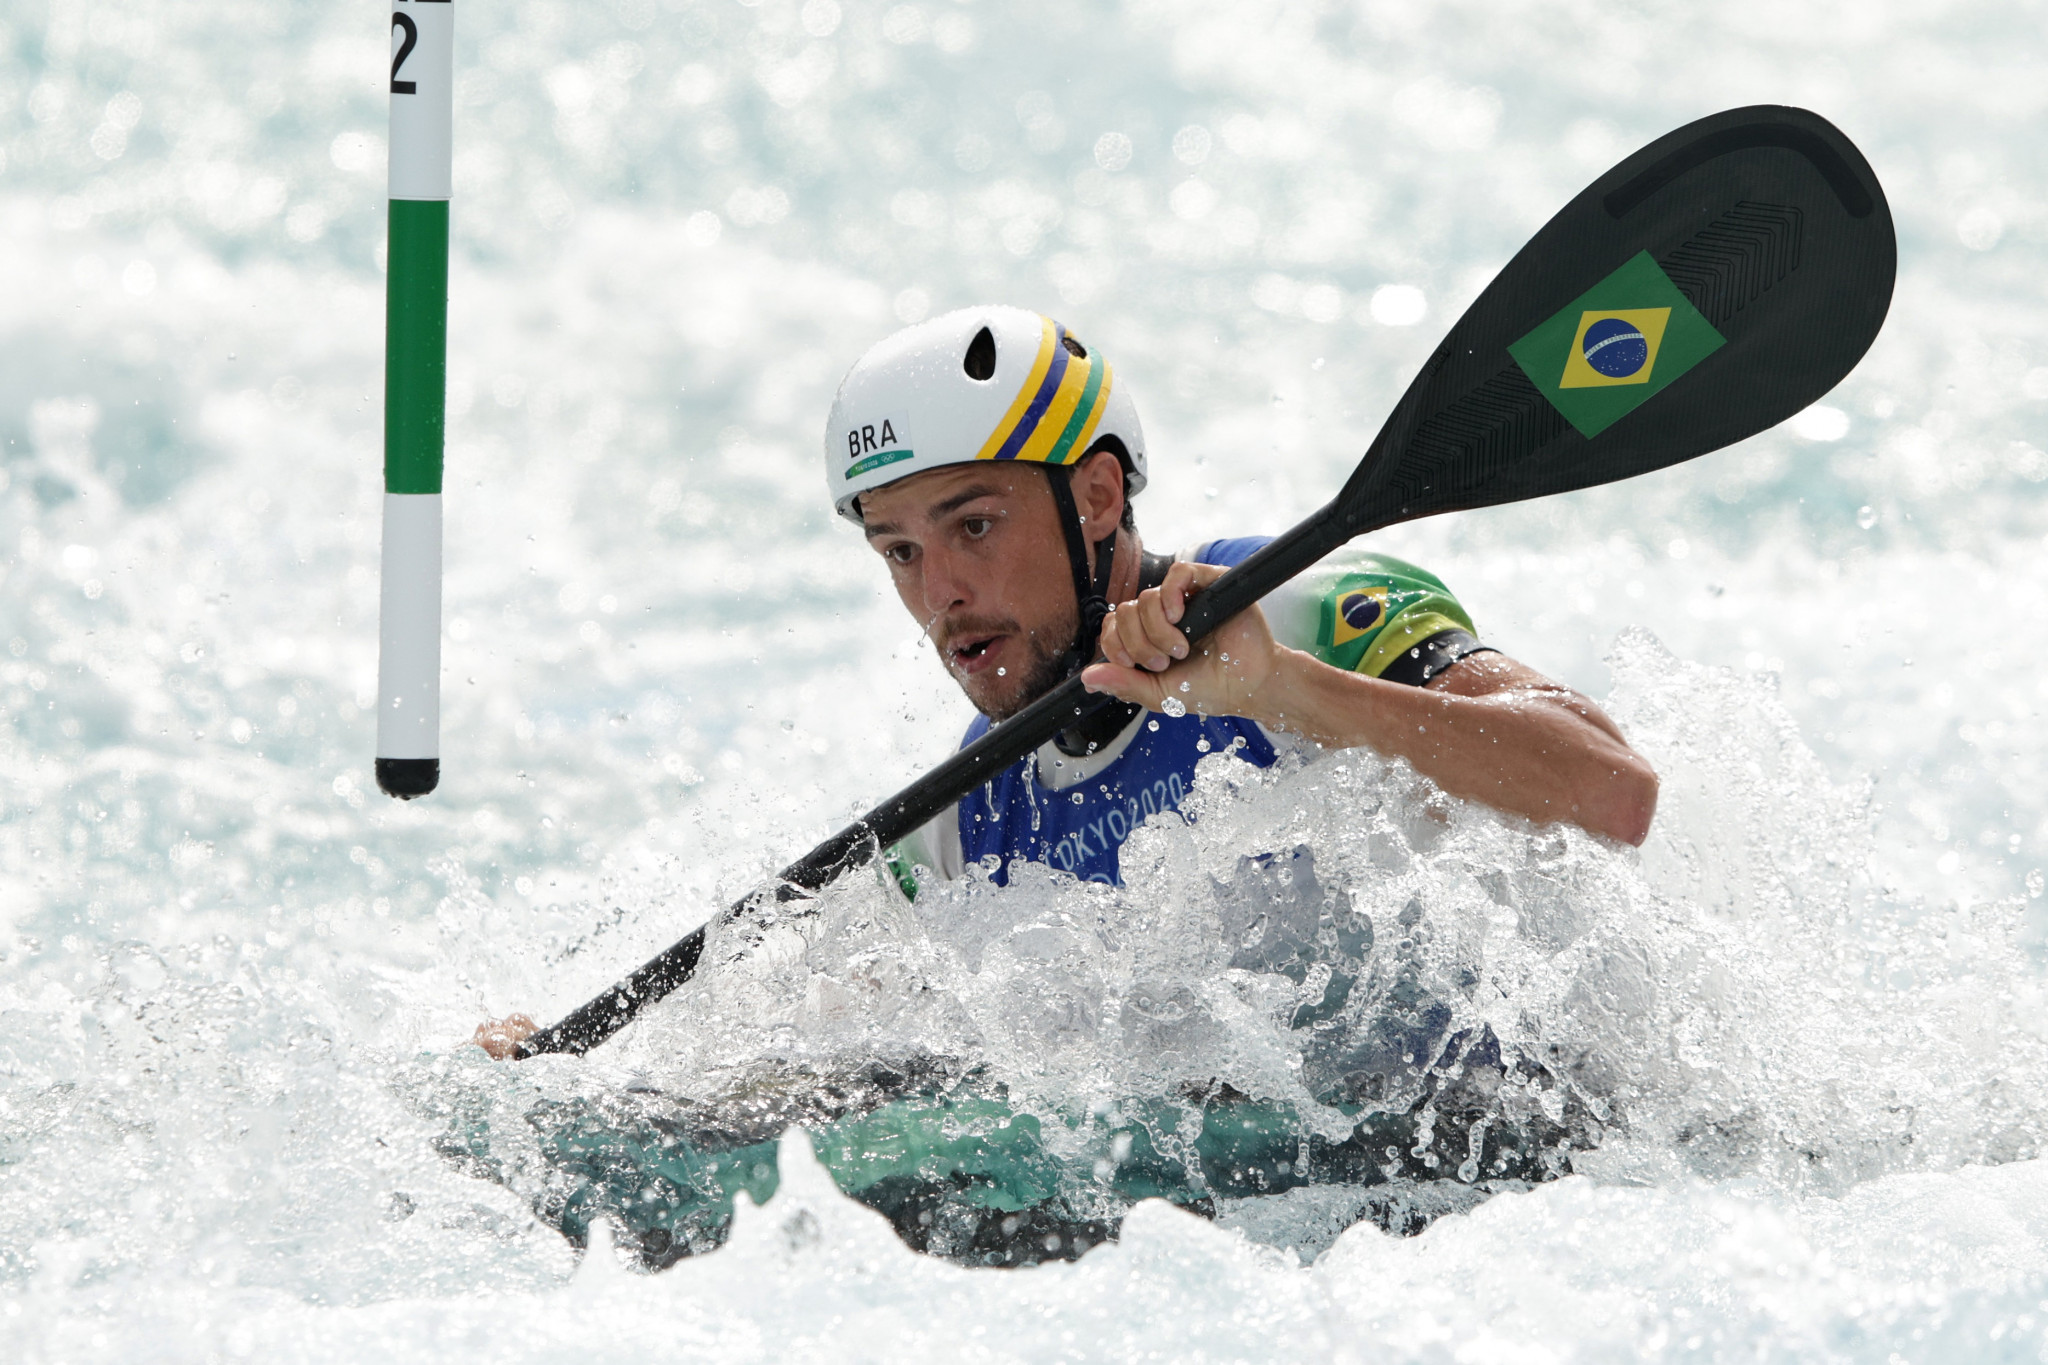 Santiago 2023 places on offer at Pan American Canoe Slalom Championships